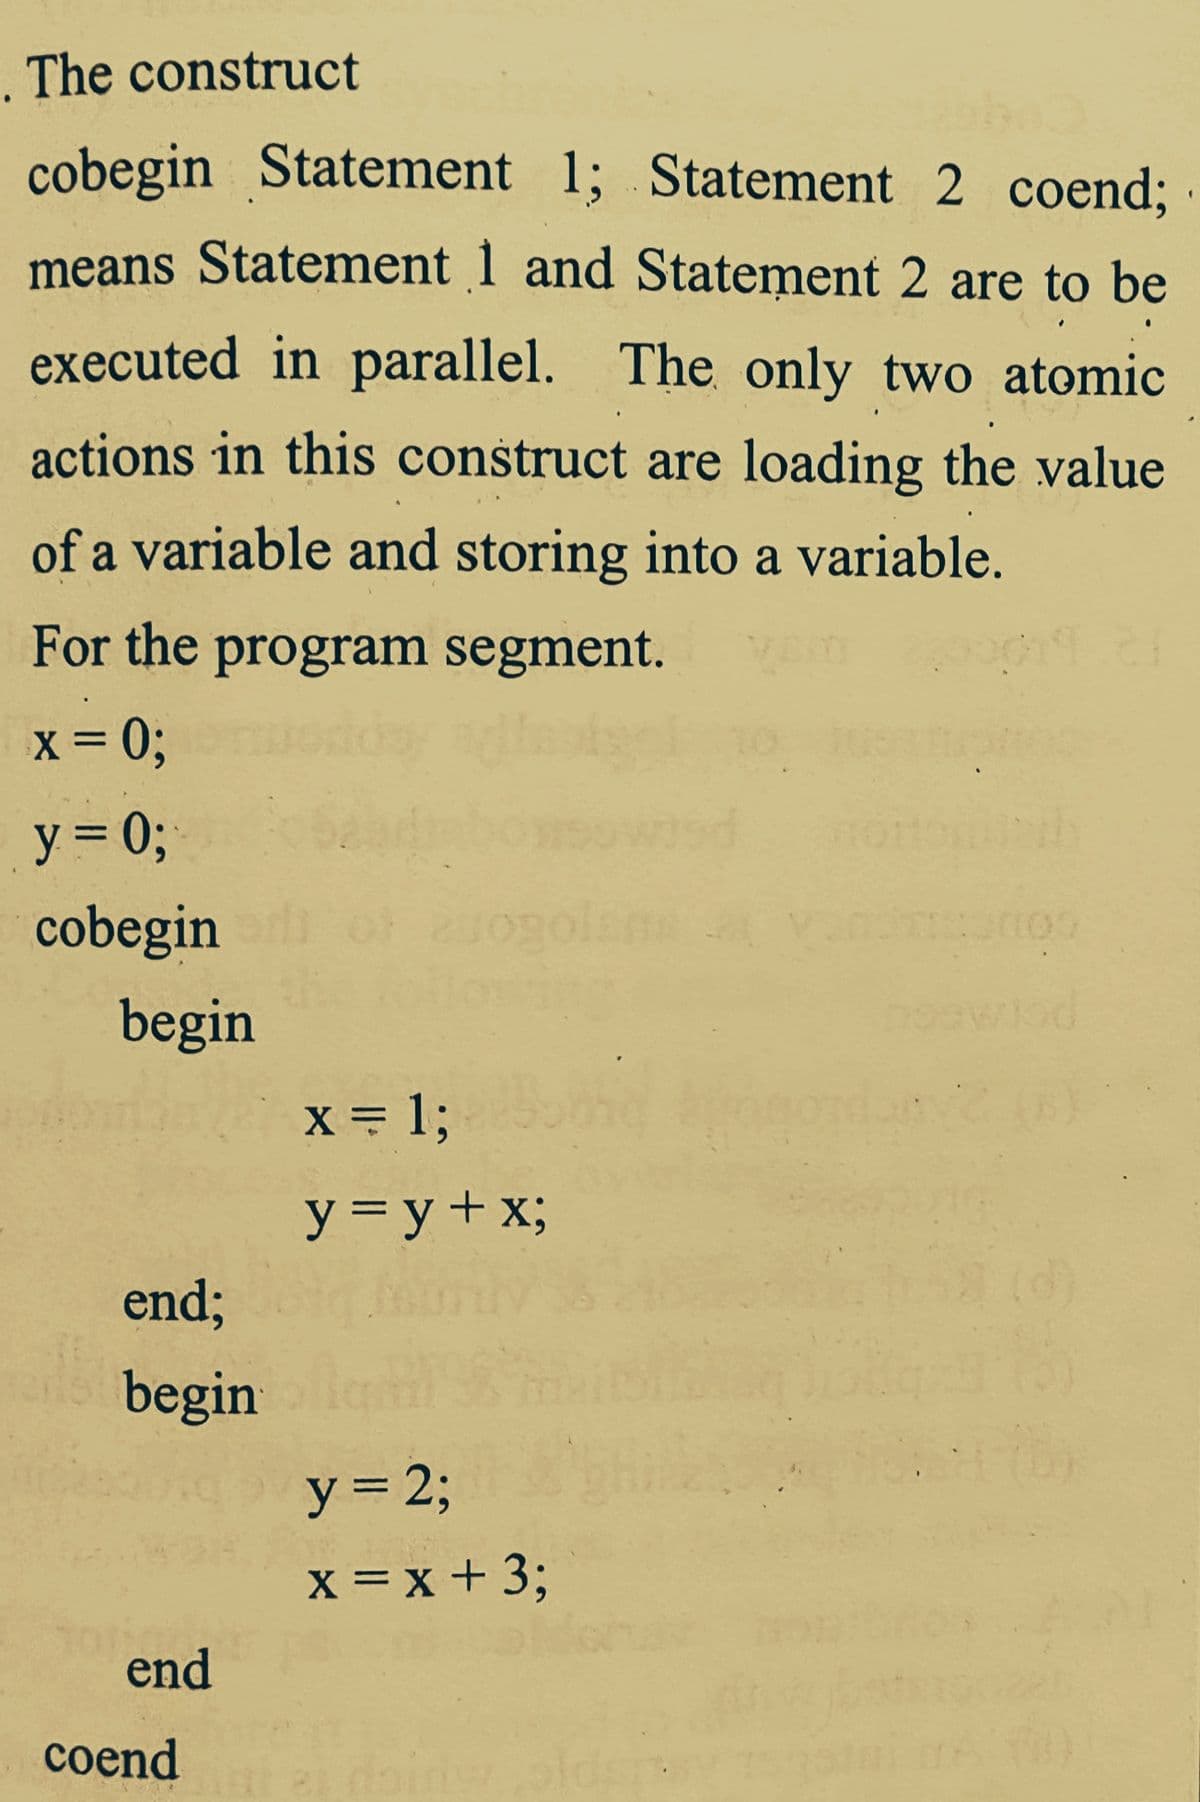 . The construct
cobegin Statement 1; Statement 2 coend%;
means Statement 1 and Statement 2 are to be
executed in parallel. The only two atomic
actions in this construct are loading the value
of a variable and storing into a variable.
For the program segment.
X = 0;
y = 0;
cobegin
of
begin
X = 1;
y = y+x;
end;
(d)
begin
y = 23;
x = x + 3;
end
сoend
